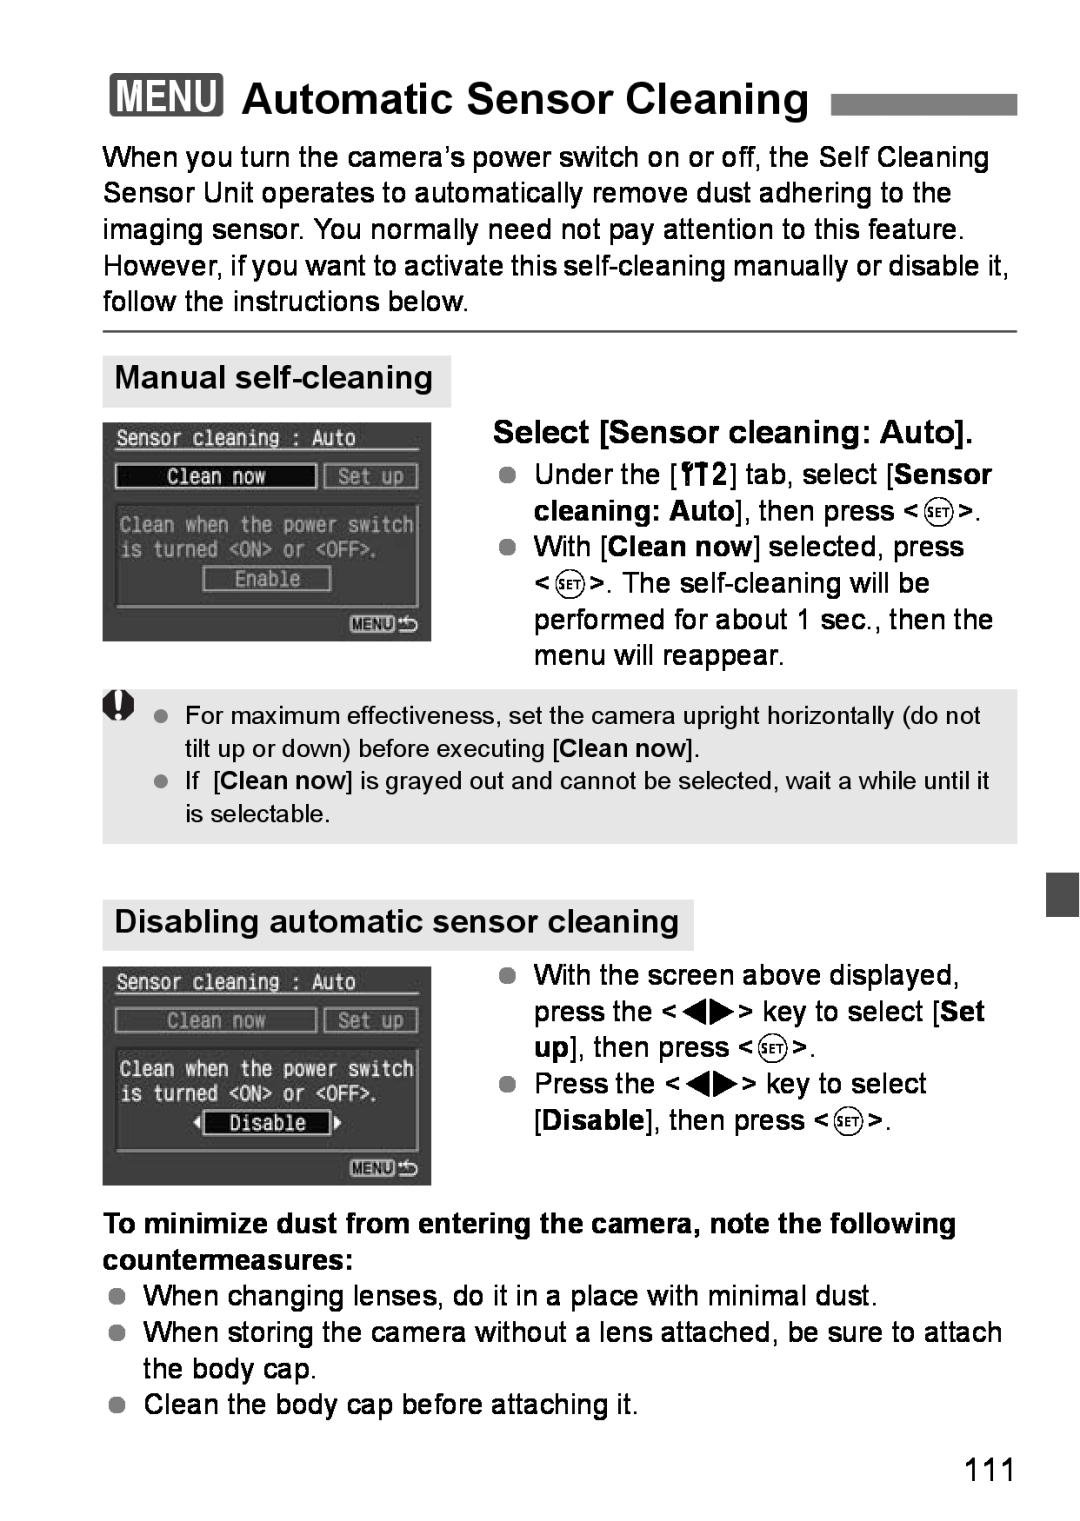 Canon EOS DIGITAL REBEL XTI instruction manual 3Automatic Sensor Cleaning, Manual self-cleaning Select Sensor cleaning Auto 